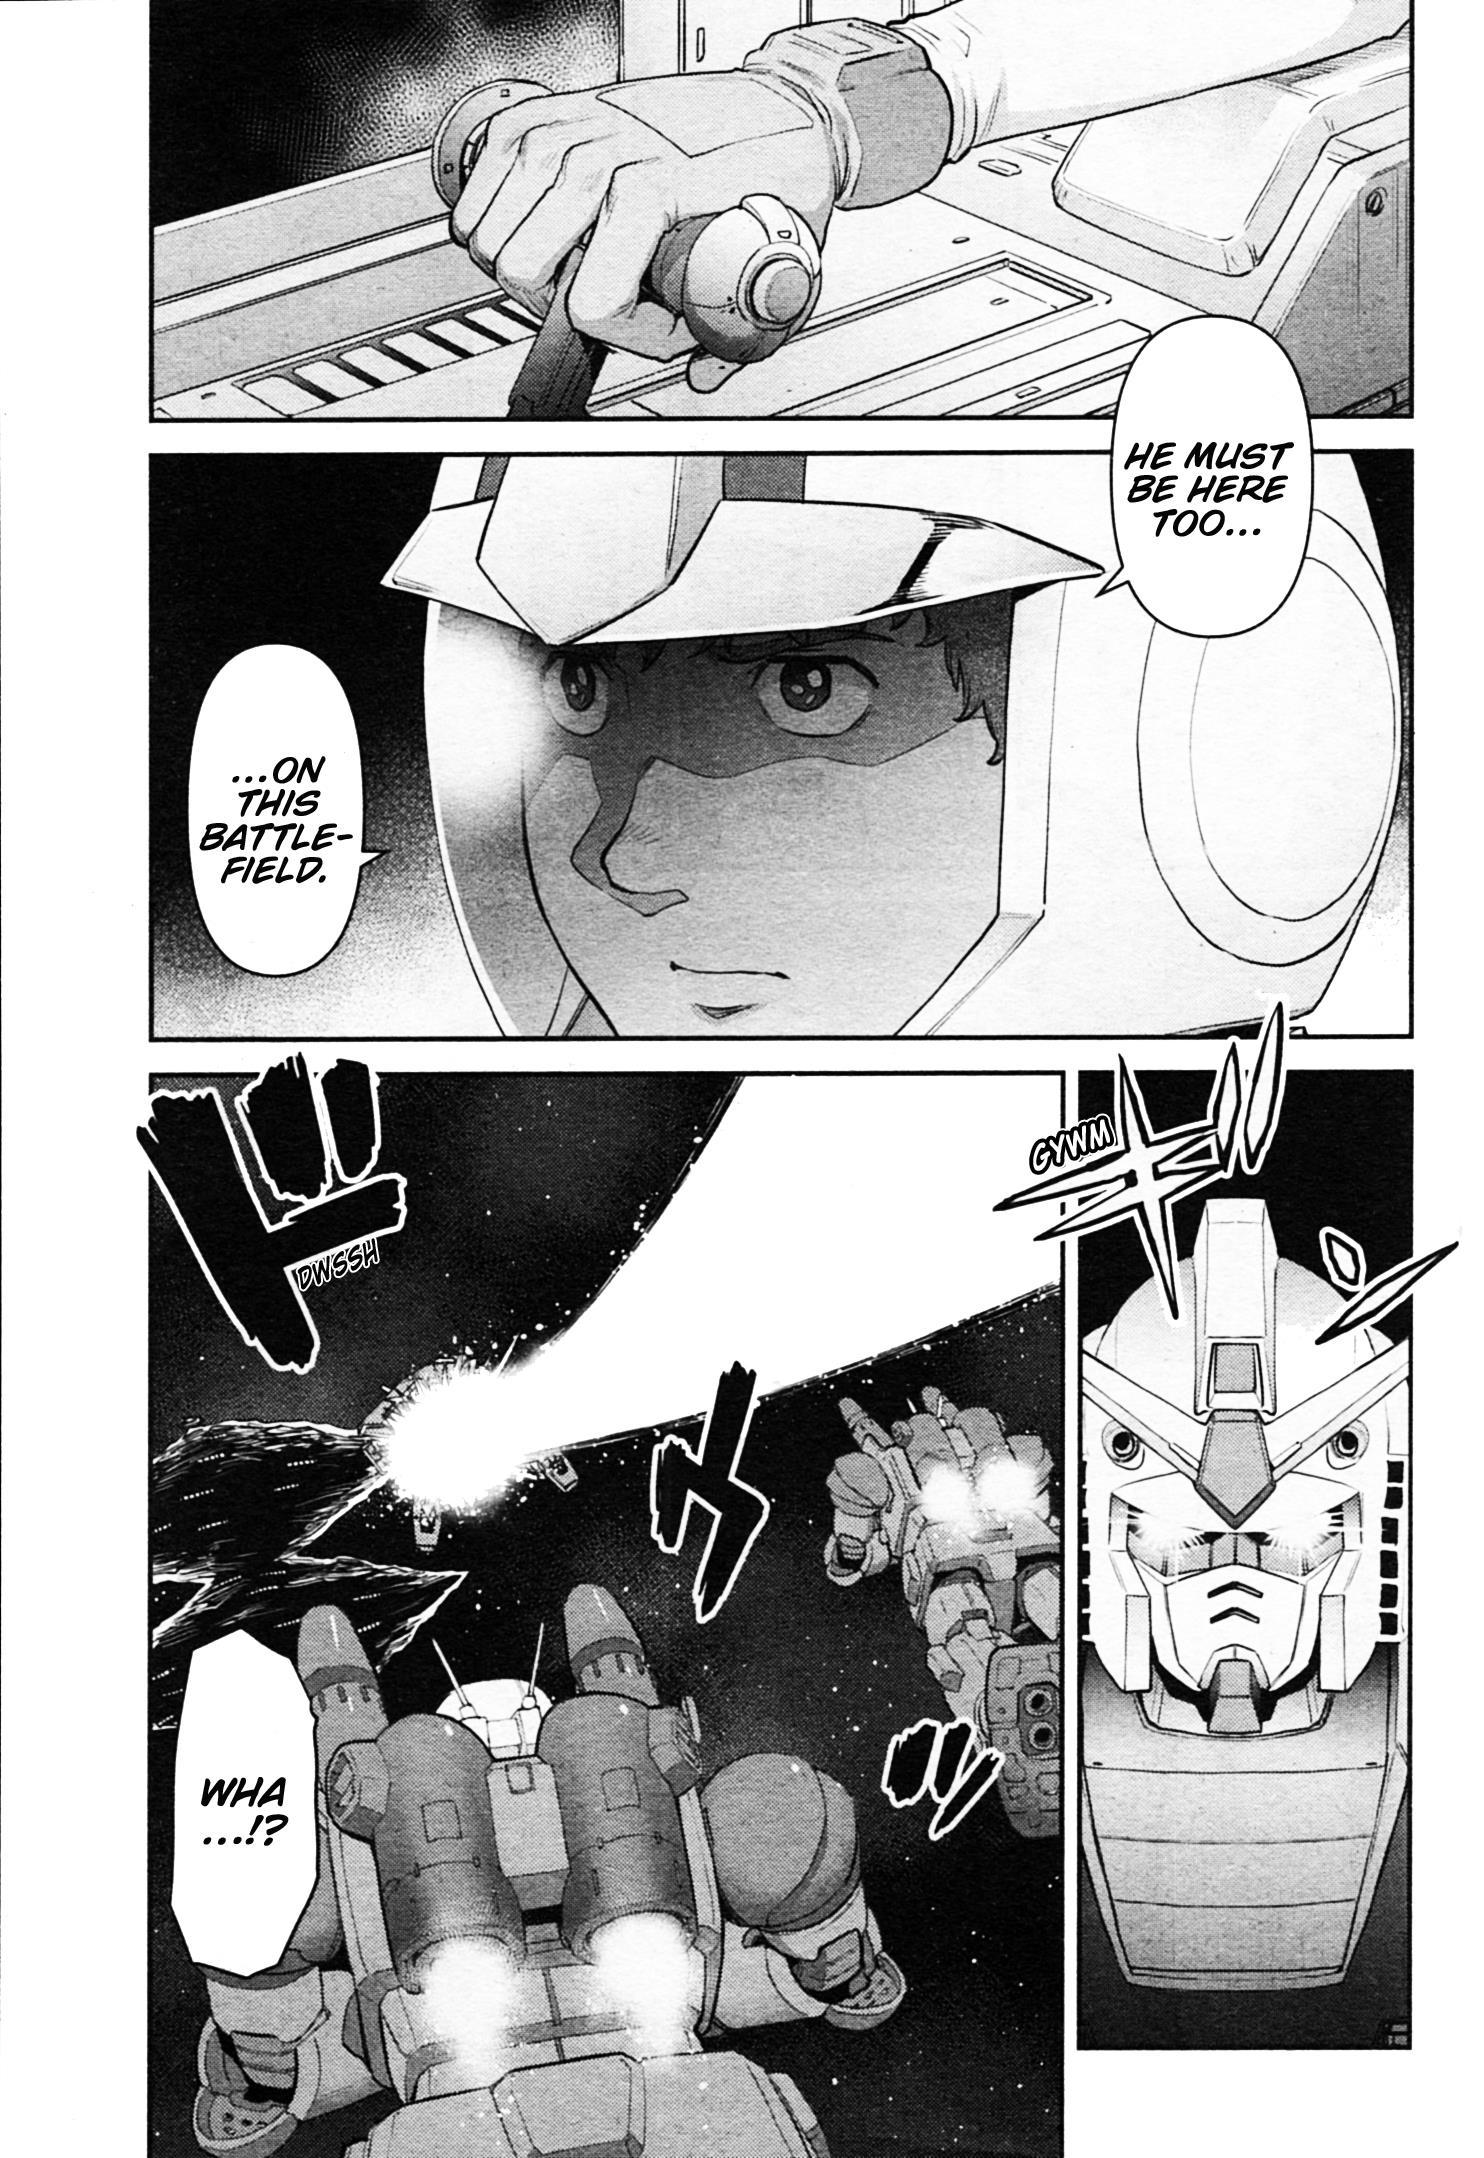 Mobile Suit Gundam Pulitzer - Amuro Ray Beyond The Aurora Vol.2 Chapter 14: Report 14: Sayla Mass (Part 3) - Picture 3